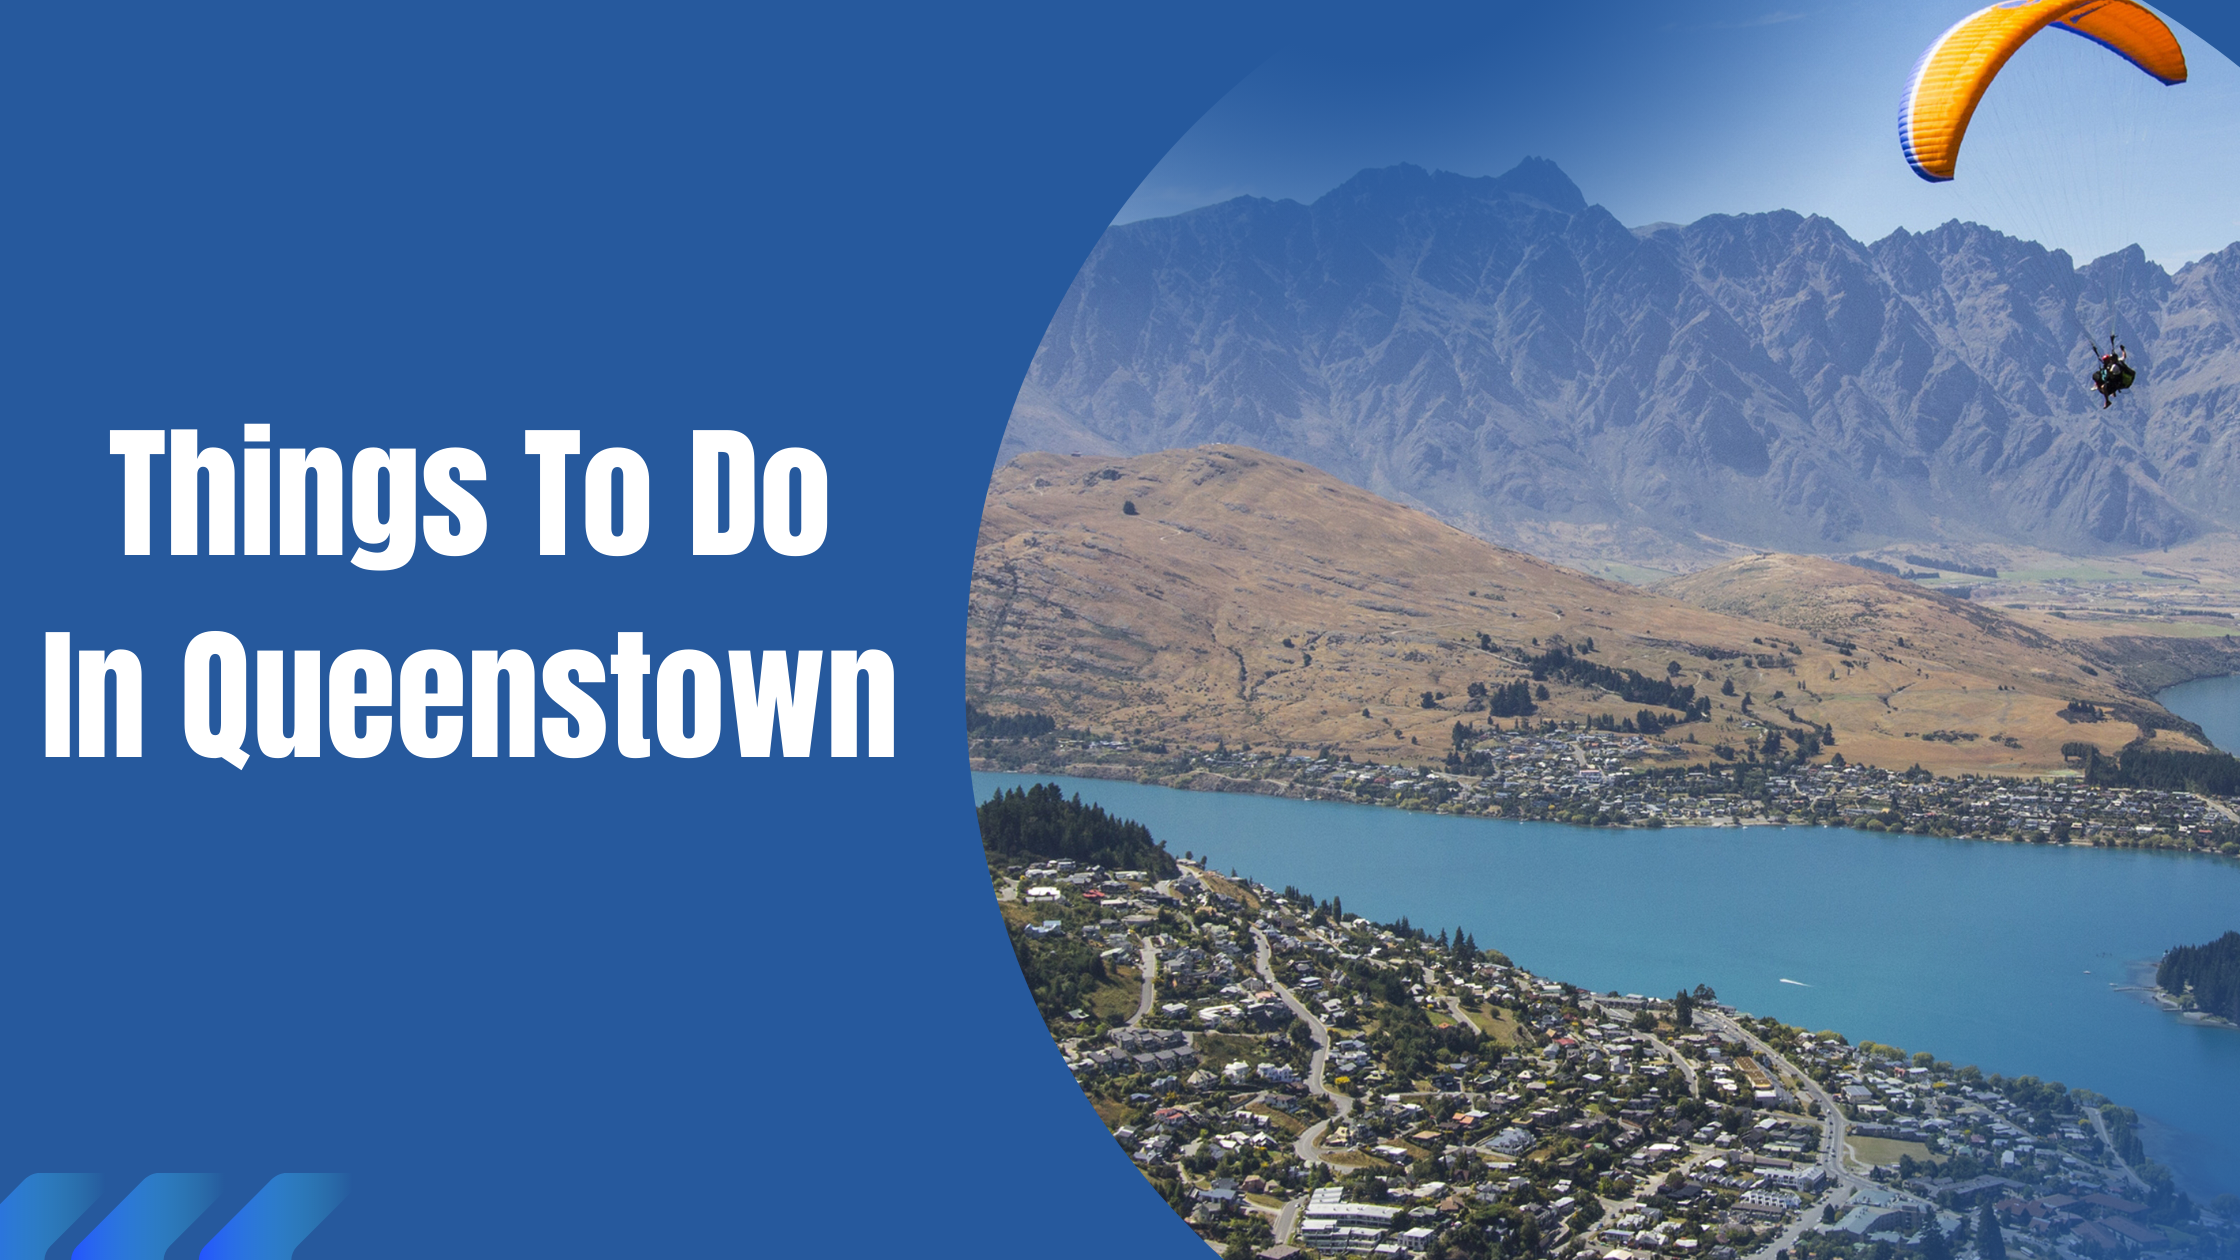 5 Things to do in Queenstown